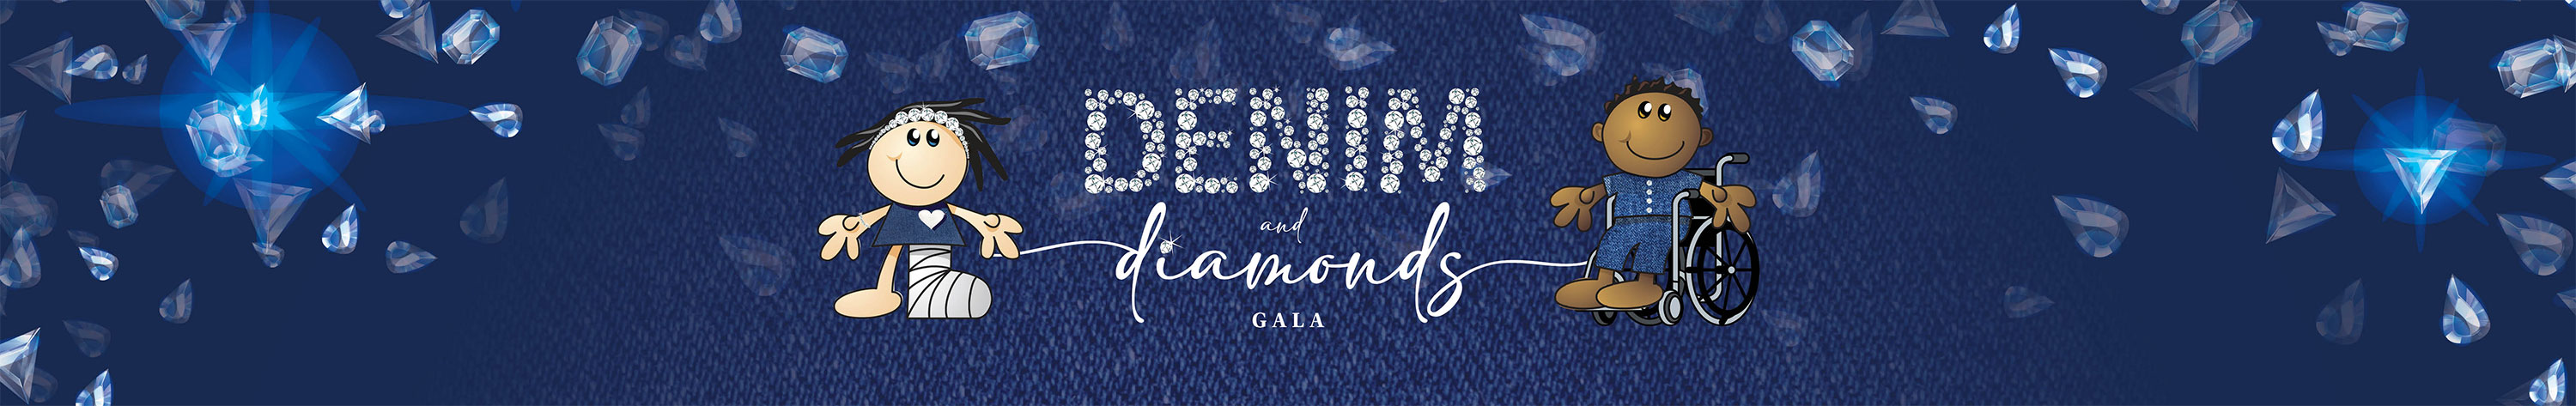 Denim and diamonds gala sandy dressed up and friend in wheelchair